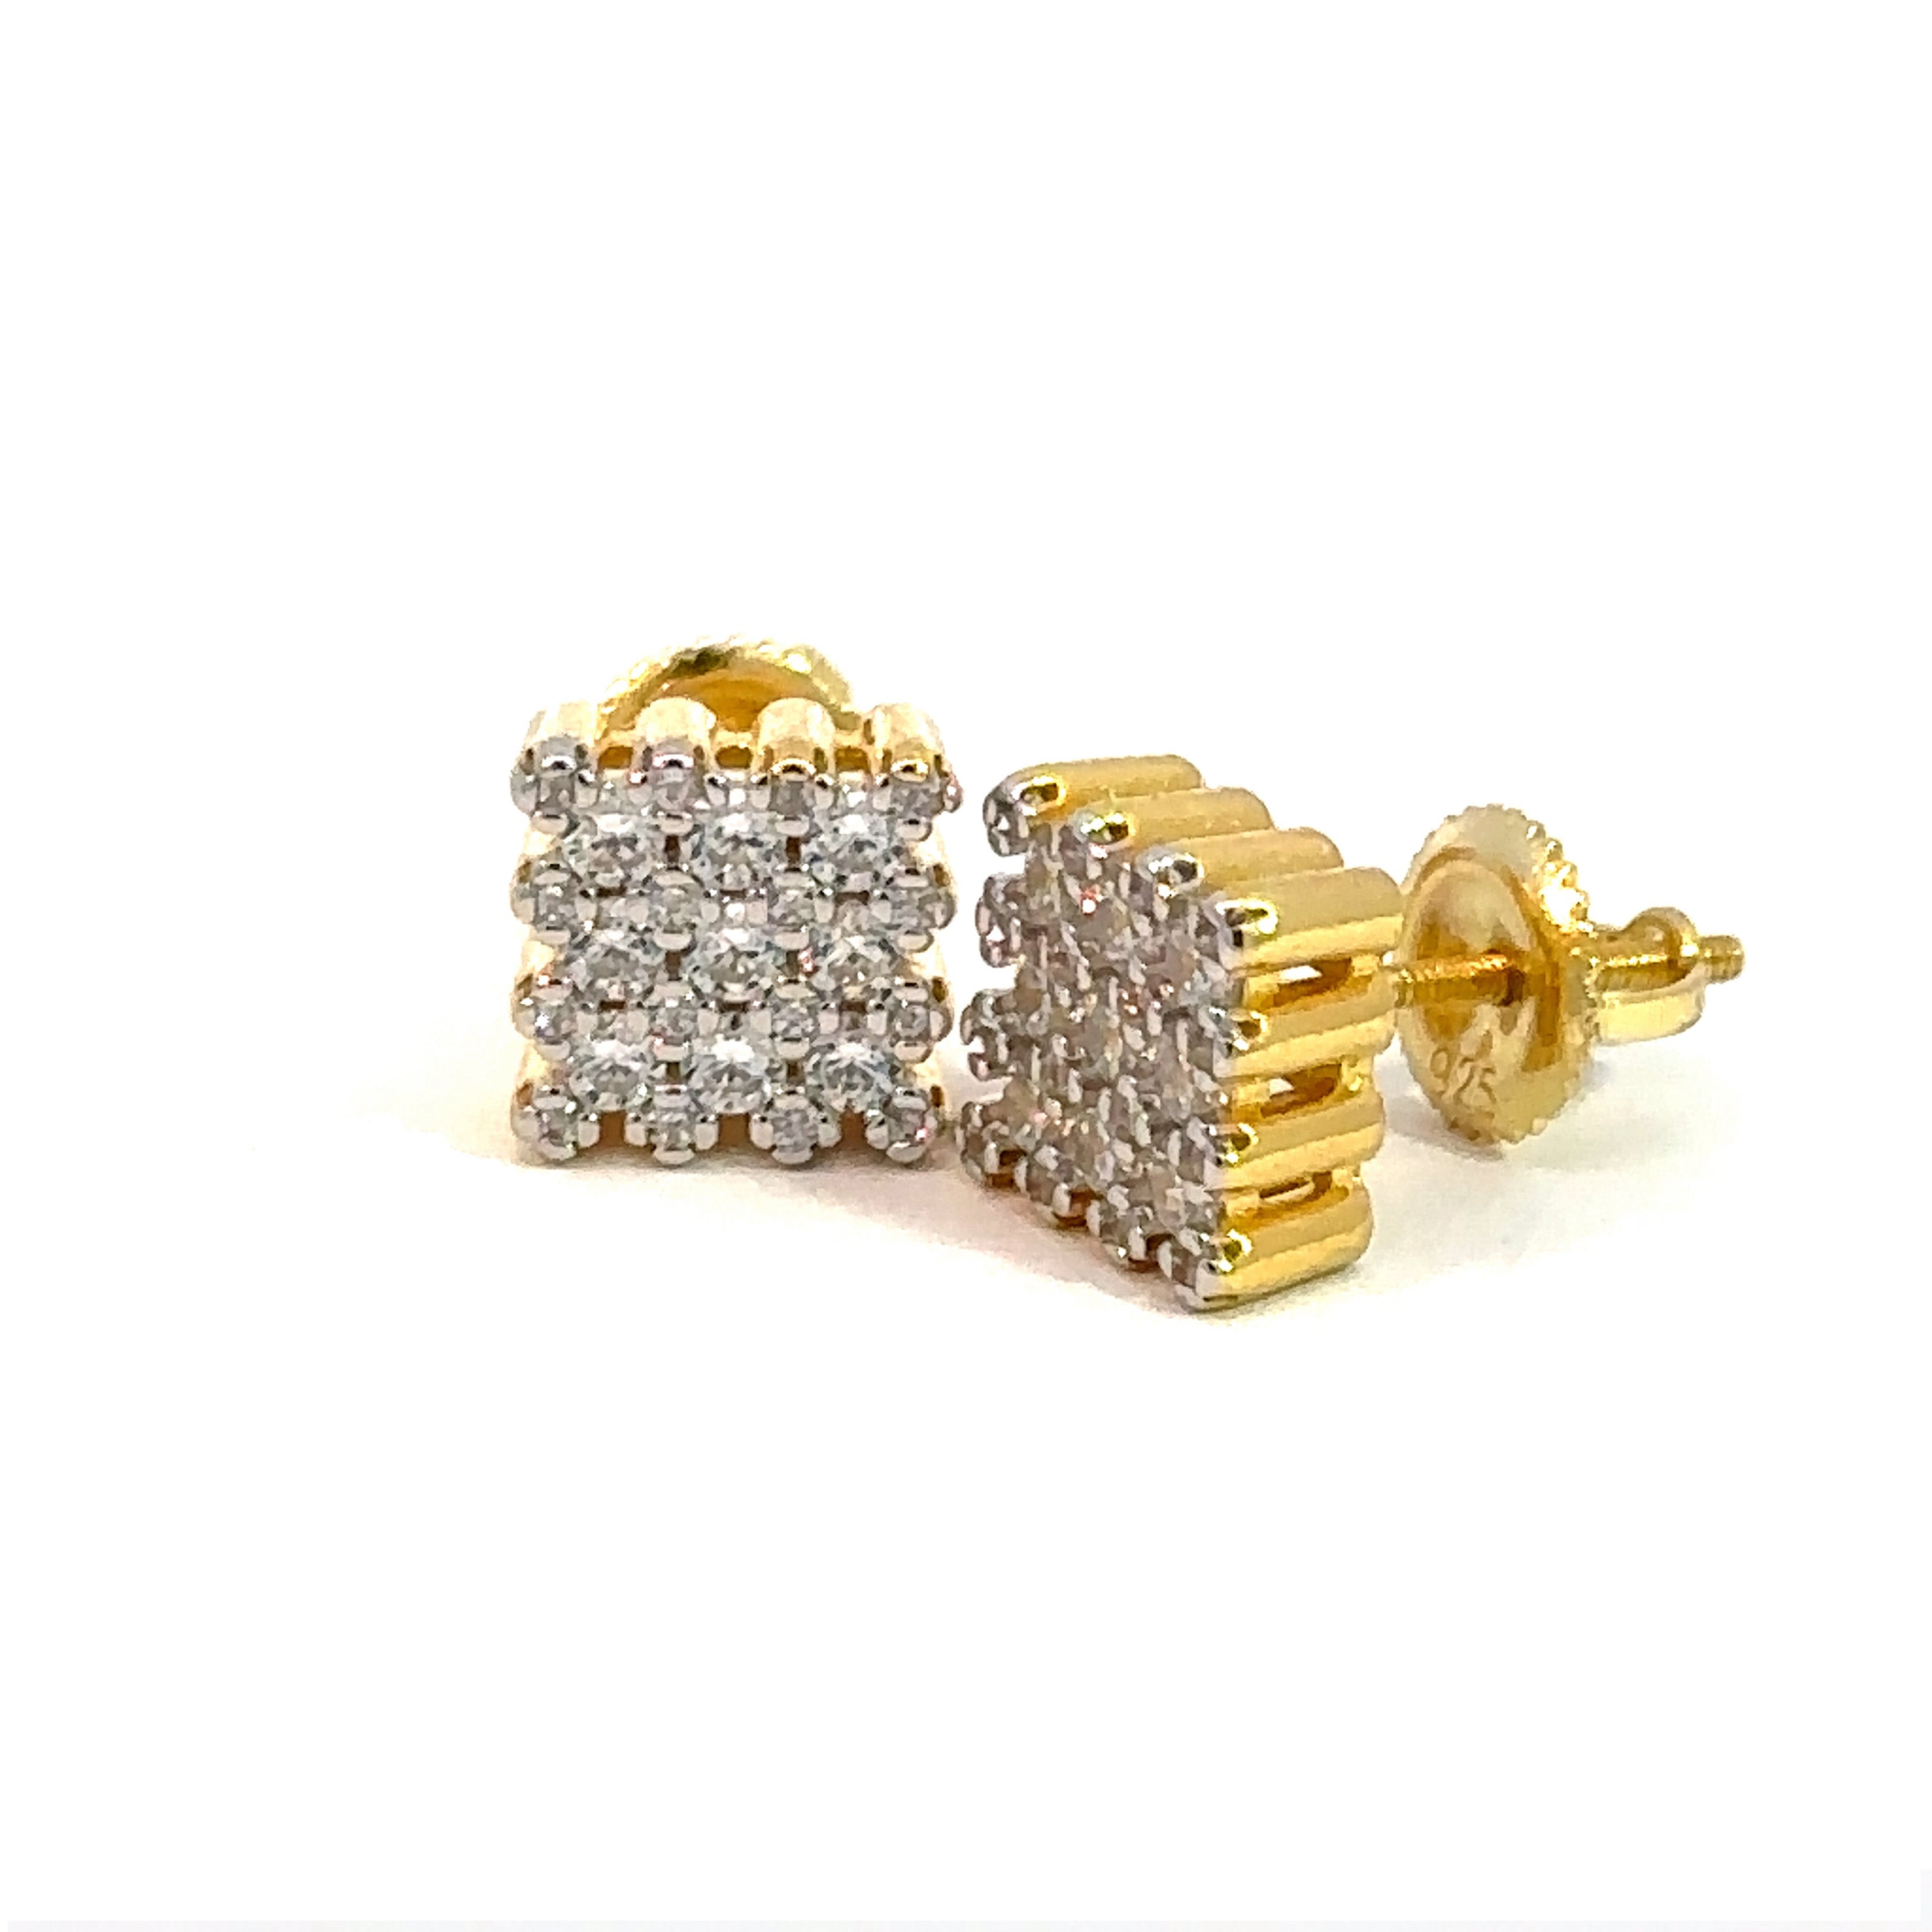 ASTRAEA 925 CZ GOLD ICED OUT EARRINGS | 9220102